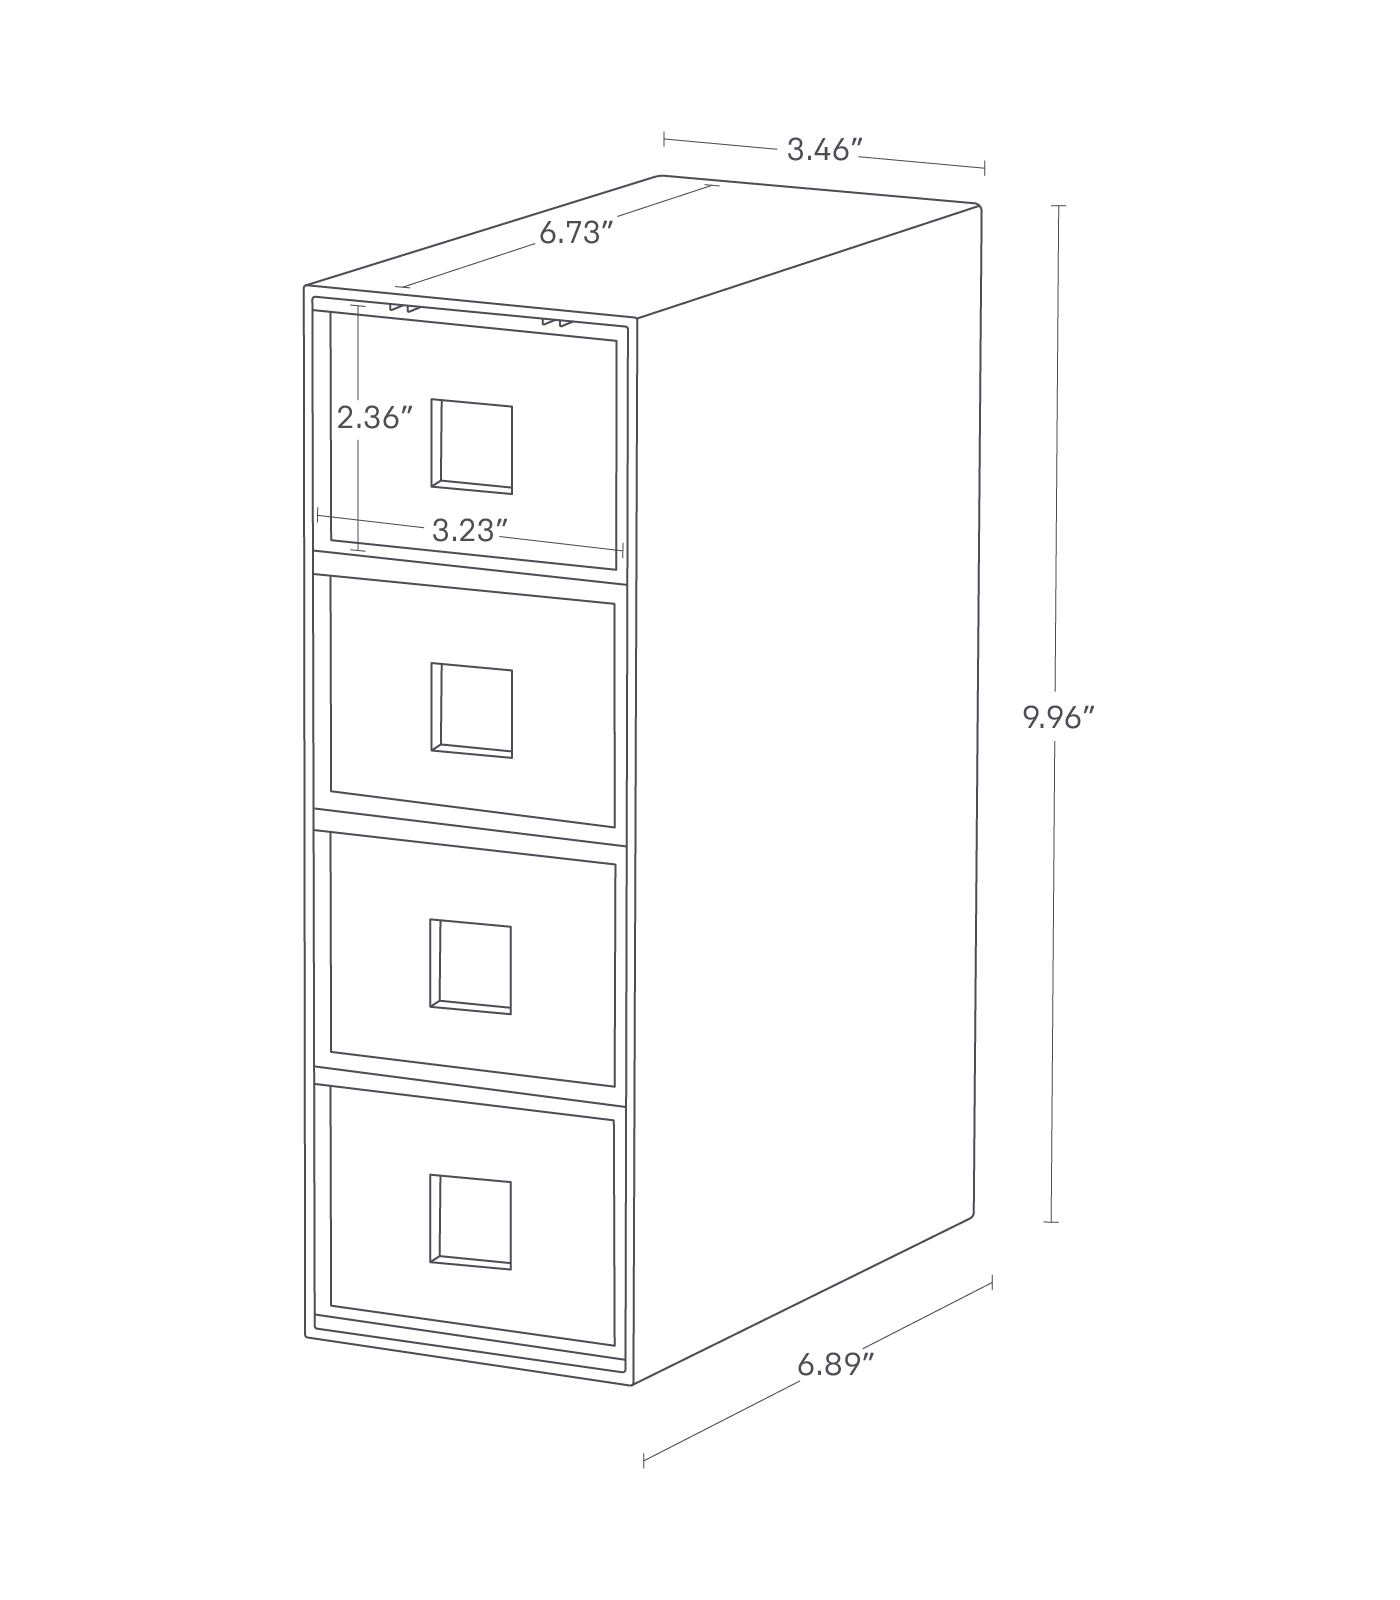 Dimension image for Storage Tower with Drawers showing length of 6.89